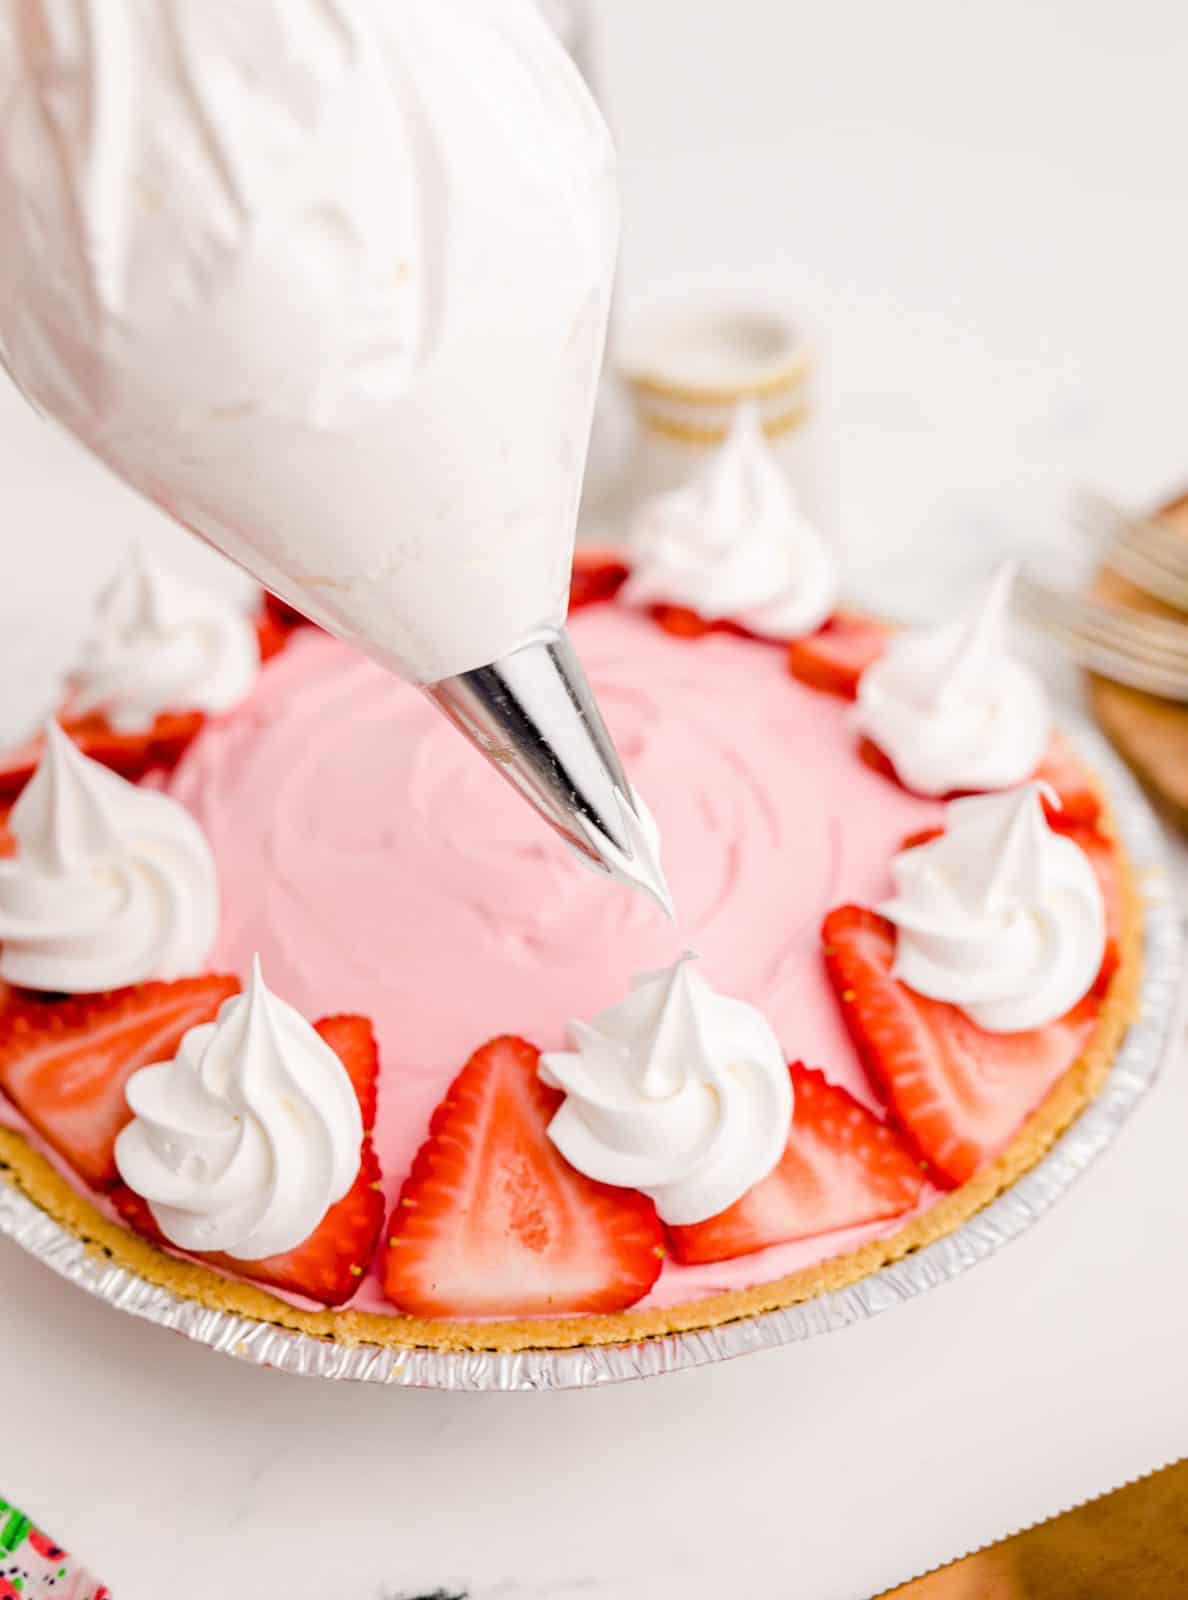 Strawberry Kool-Aid Pie Recipe being garnished with strawberries and cool whip. A piping bag is being held over the pie.